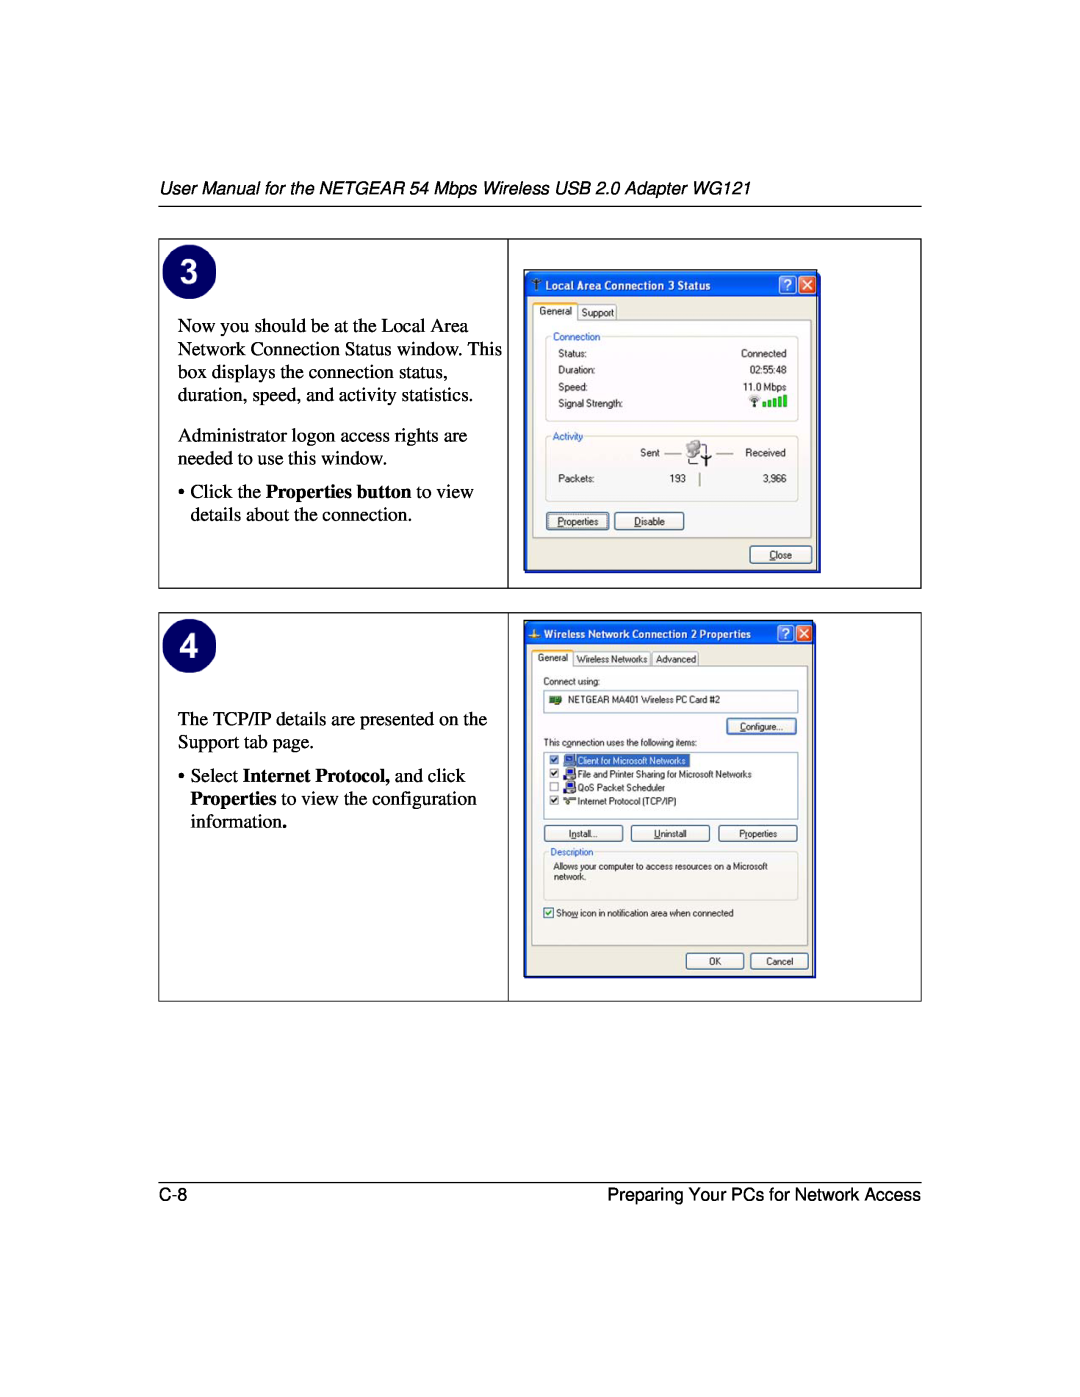 NETGEAR WG121 user manual Click the Properties button to view details about the connection 